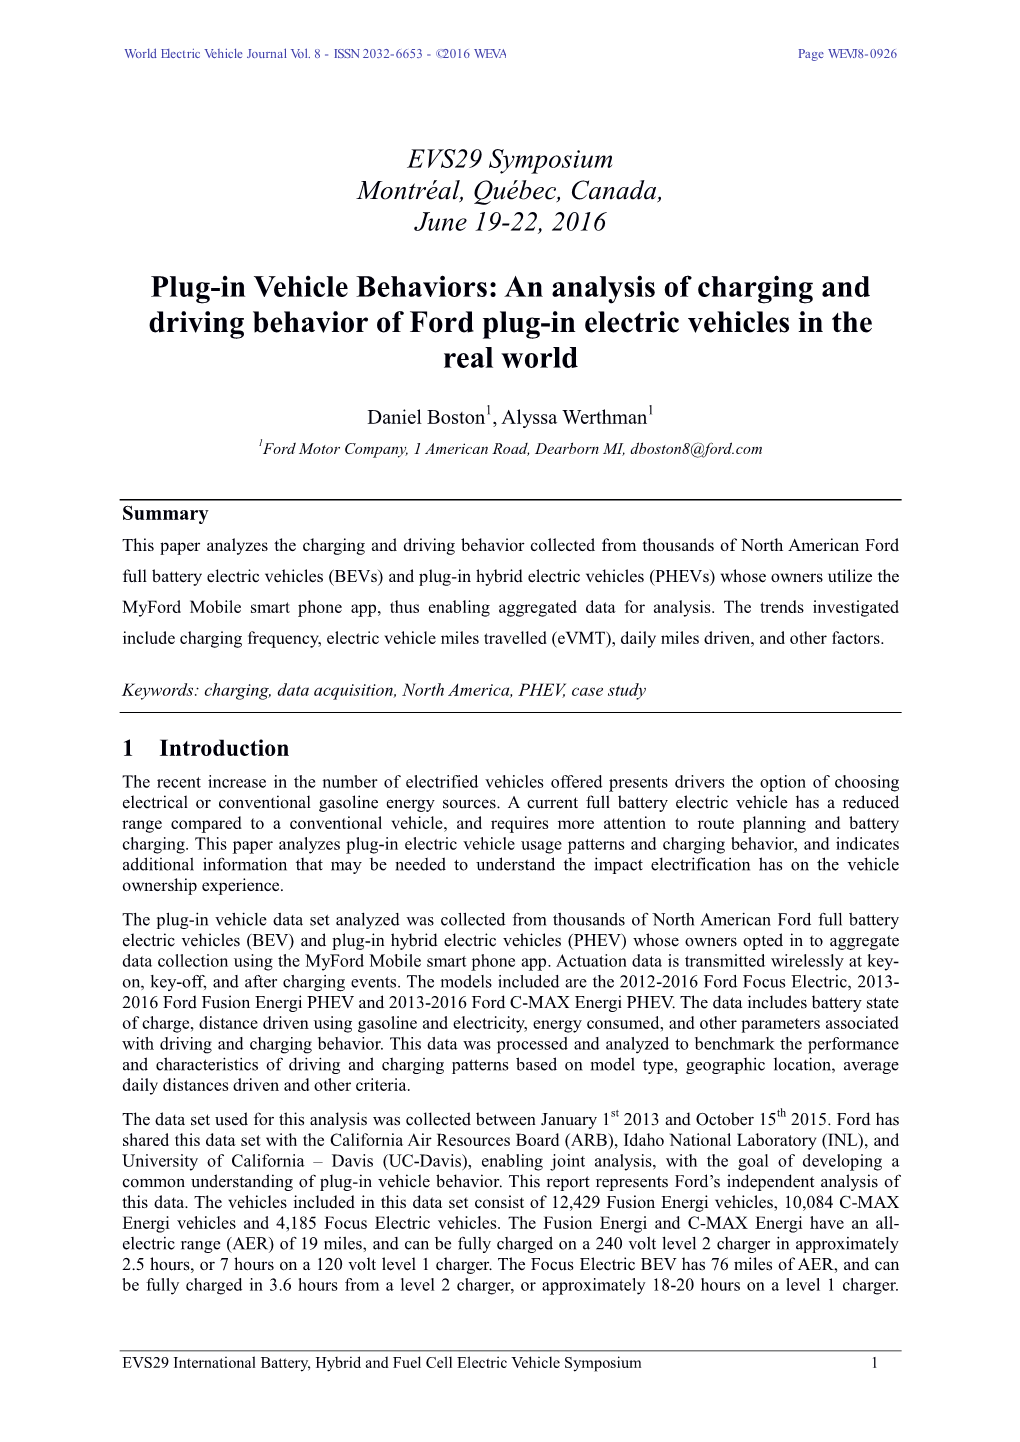 An Analysis of Charging and Driving Behavior of Ford Plug-In Electric Vehicles in the Real World